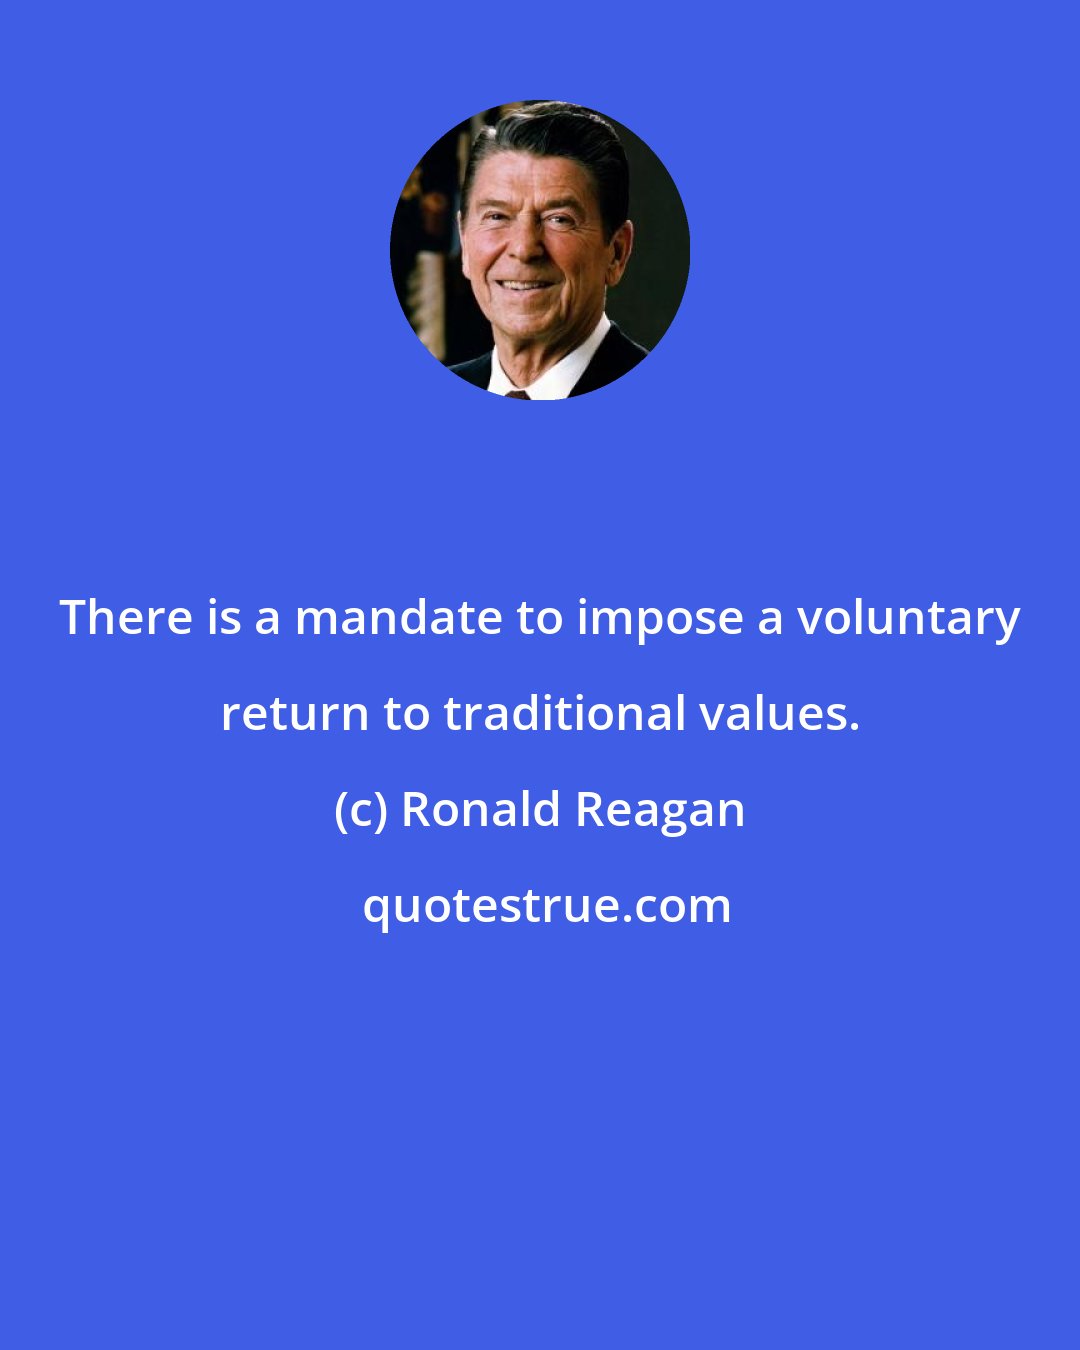 Ronald Reagan: There is a mandate to impose a voluntary return to traditional values.